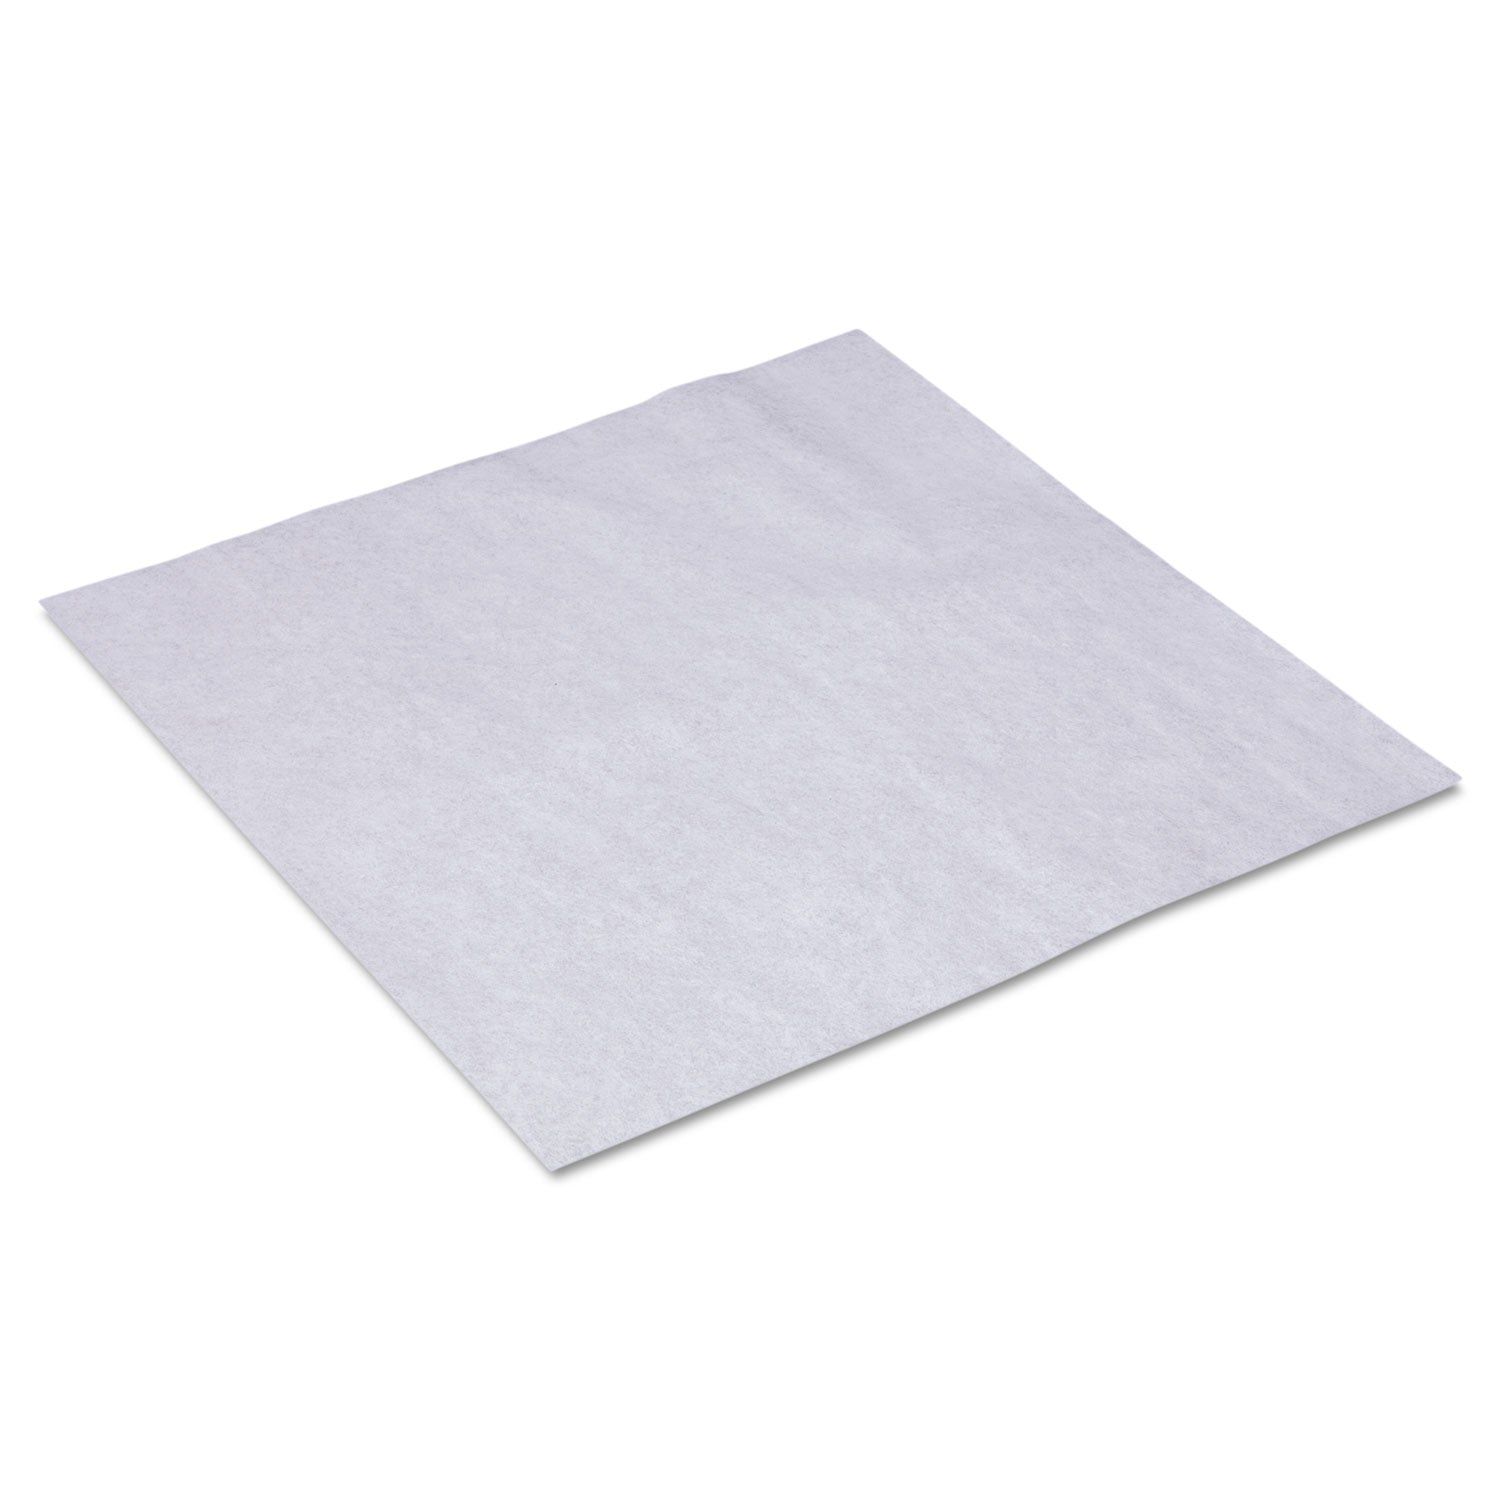 Grease-Resistant Paper Wraps and Liners, 12 x 12, White, 1,000/Box, 5 Boxes/Carton - 